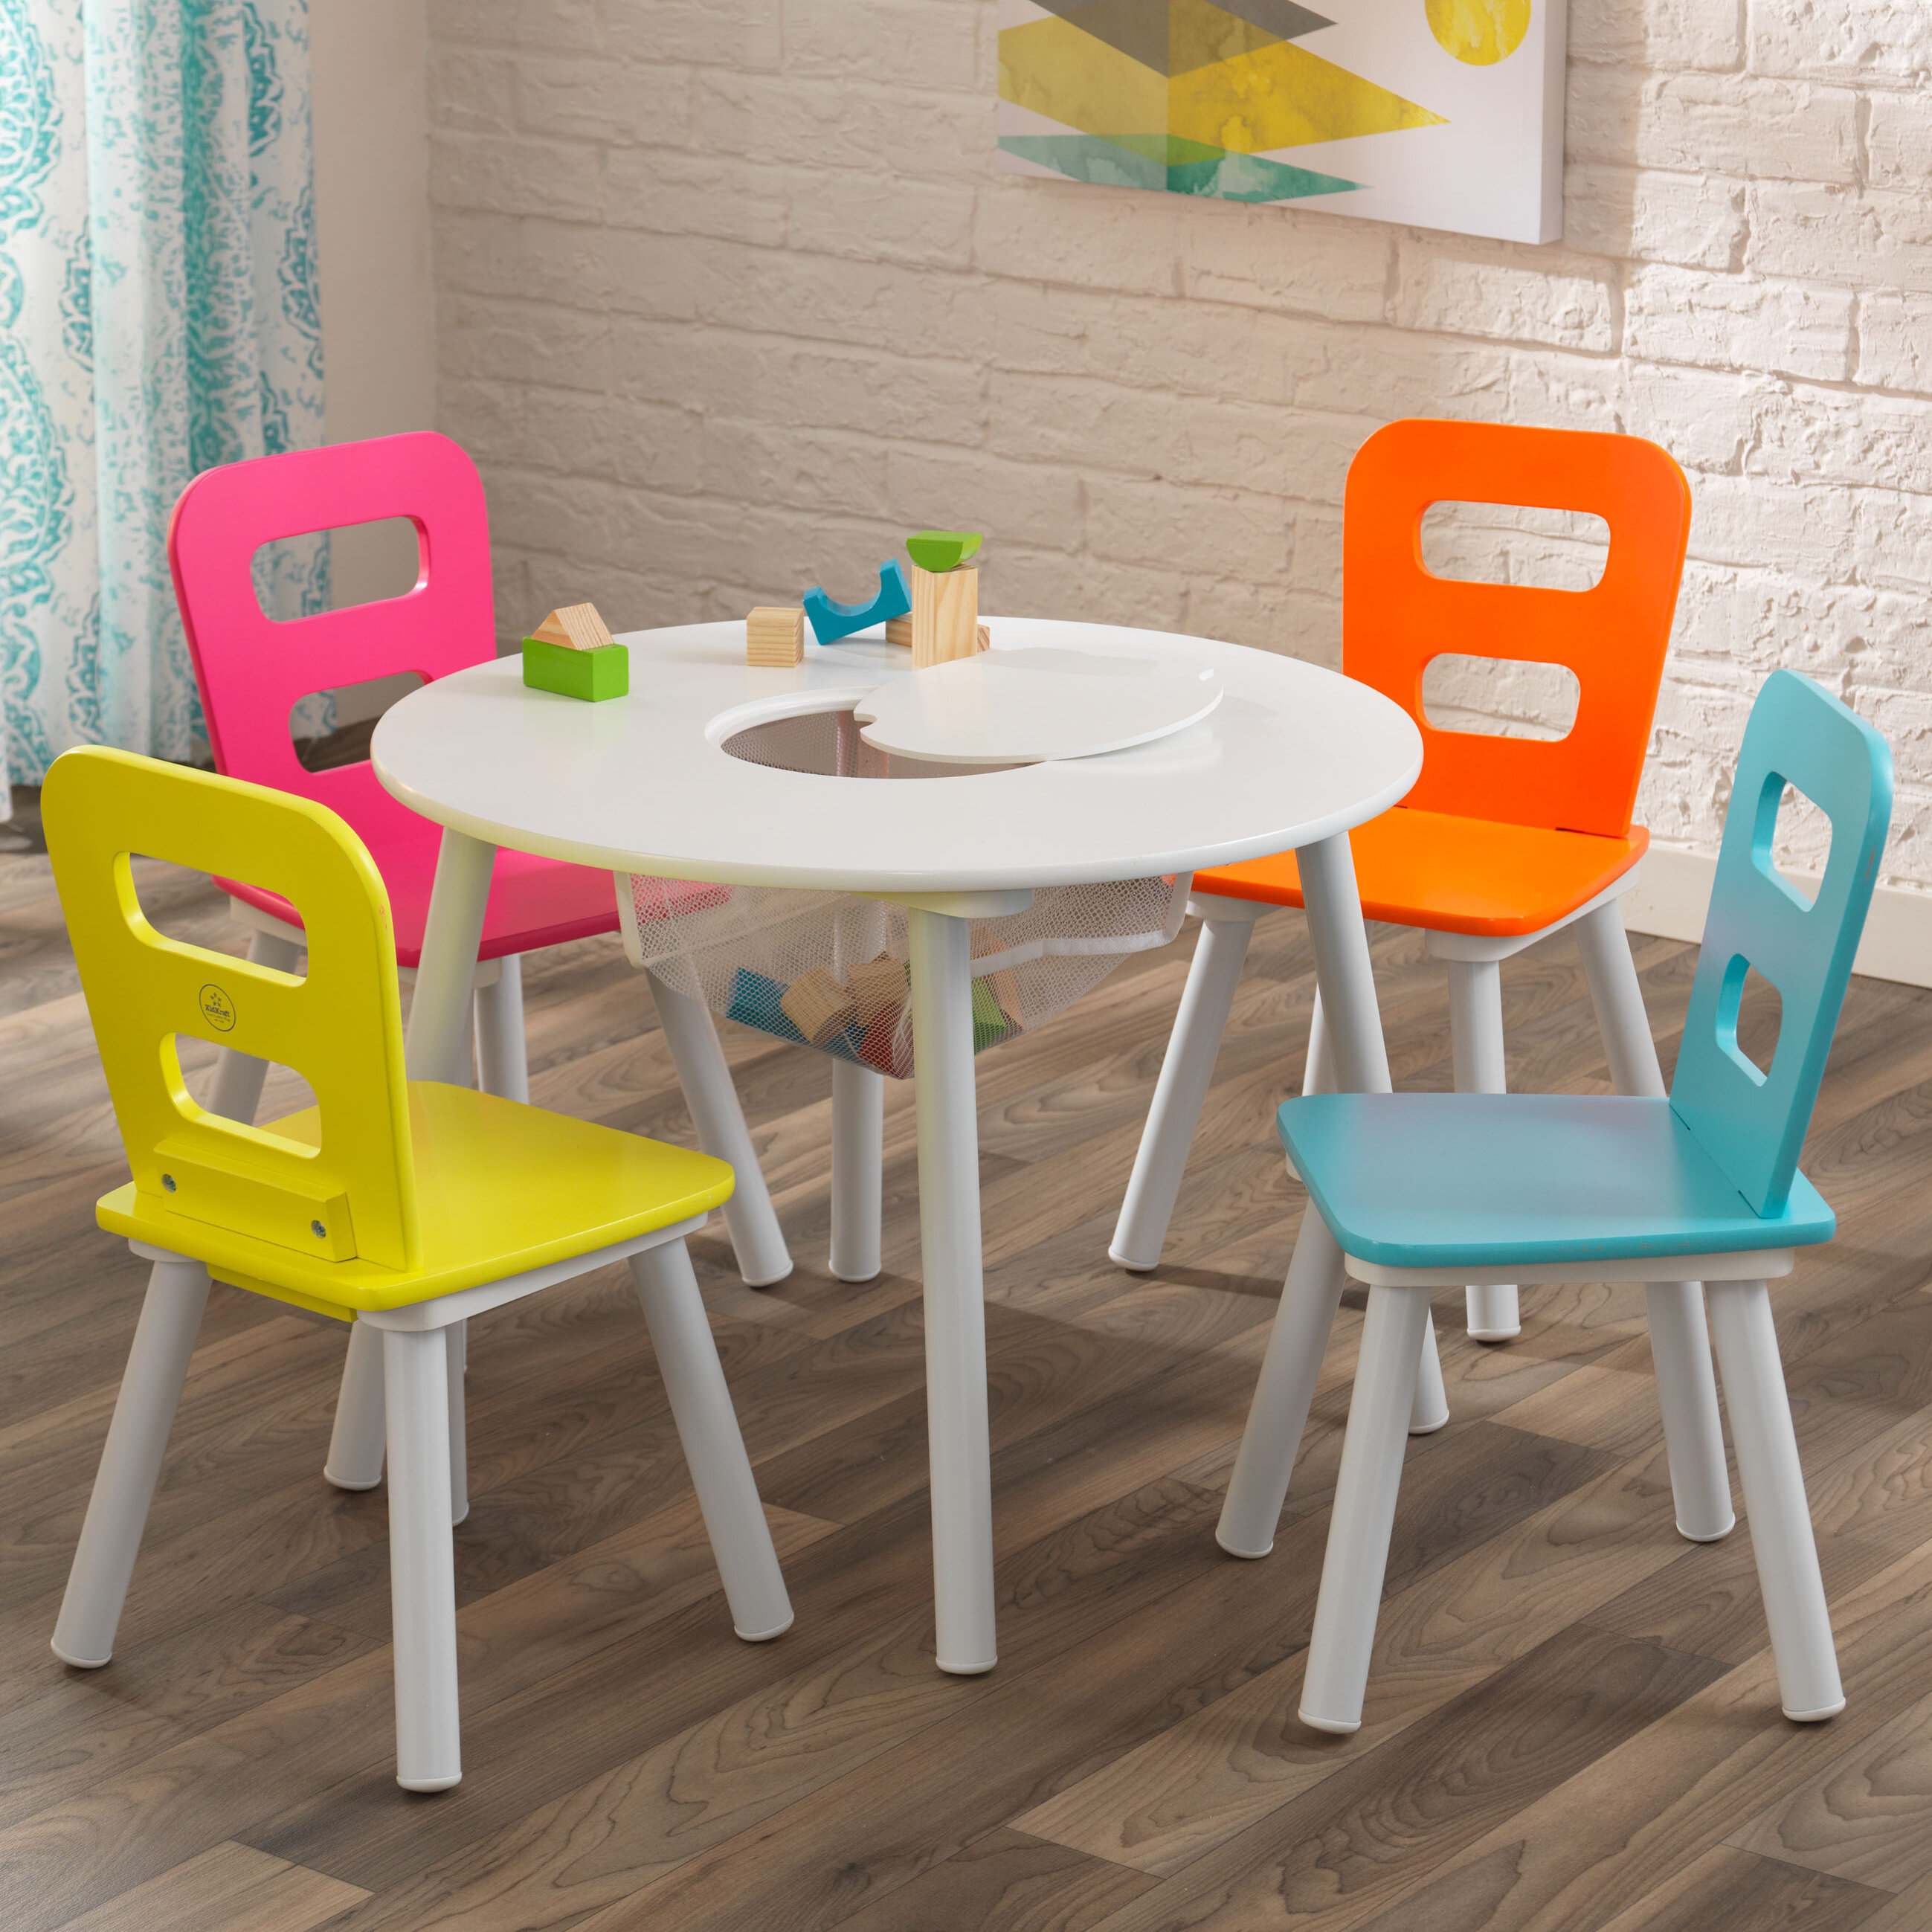 Kidkraft Kids Round Play Activity Table And Chair Set Reviews Wayfair